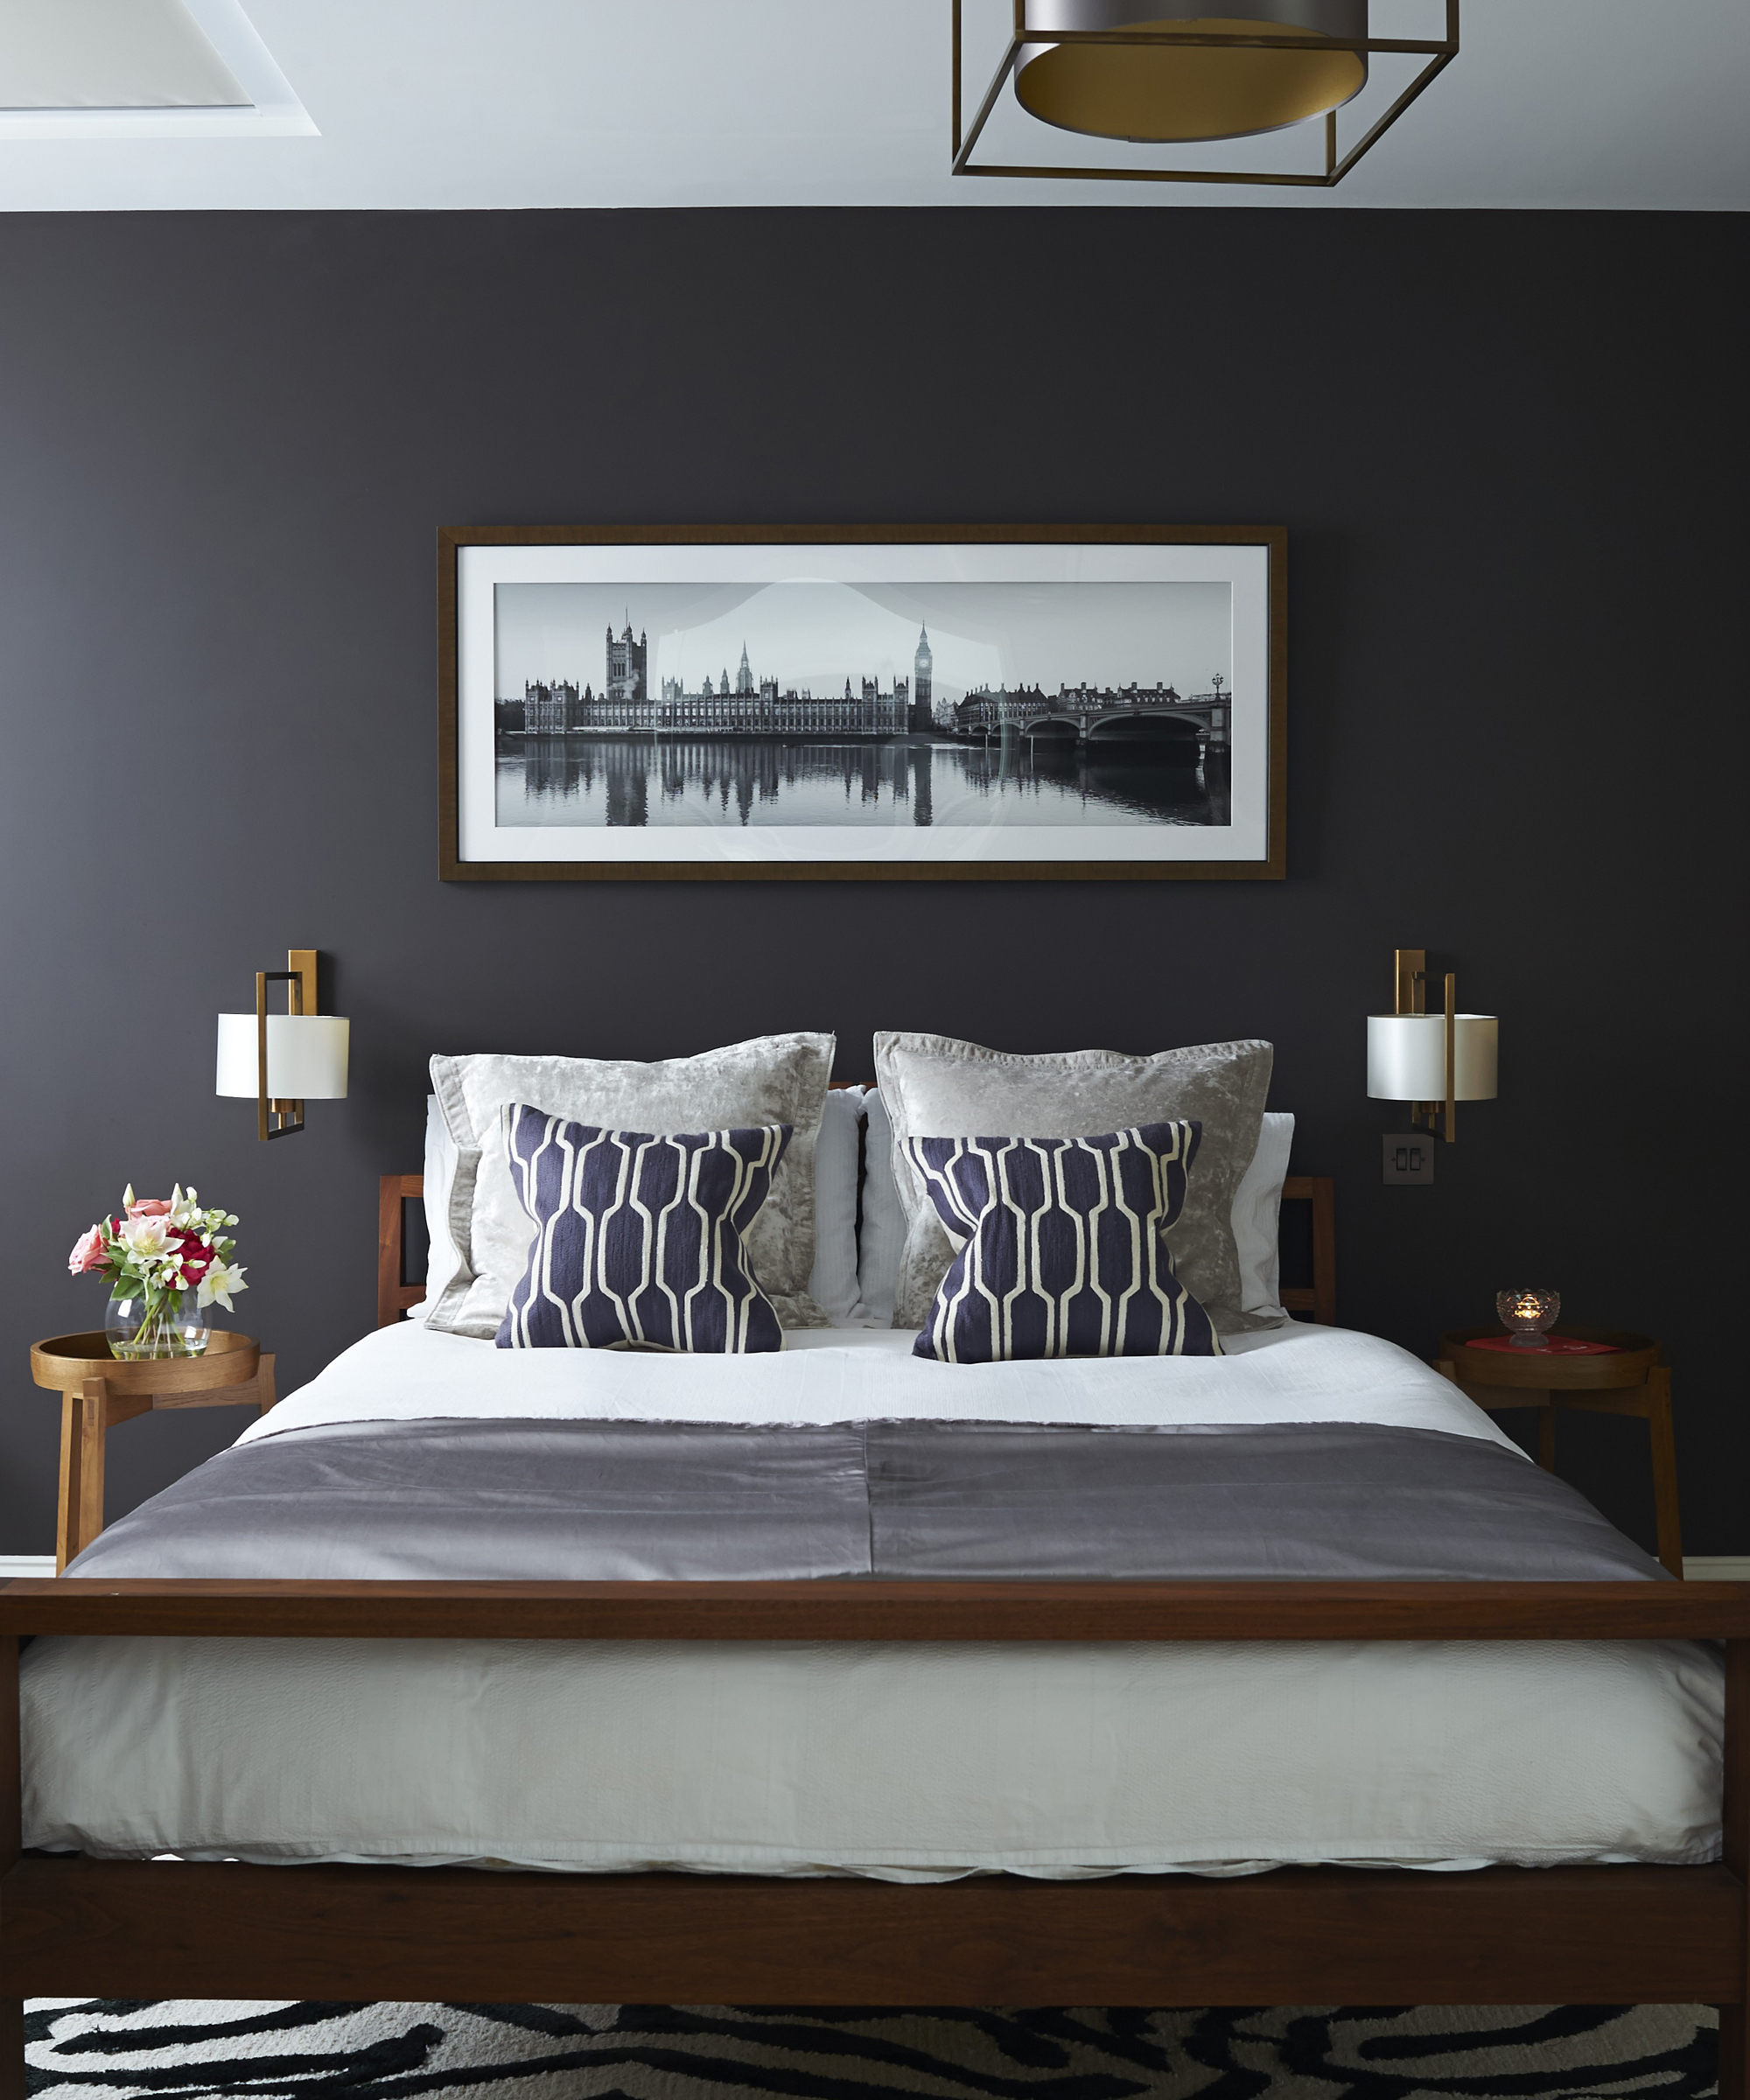 A grey bedroom idea with dark walls, white linen and black accessories